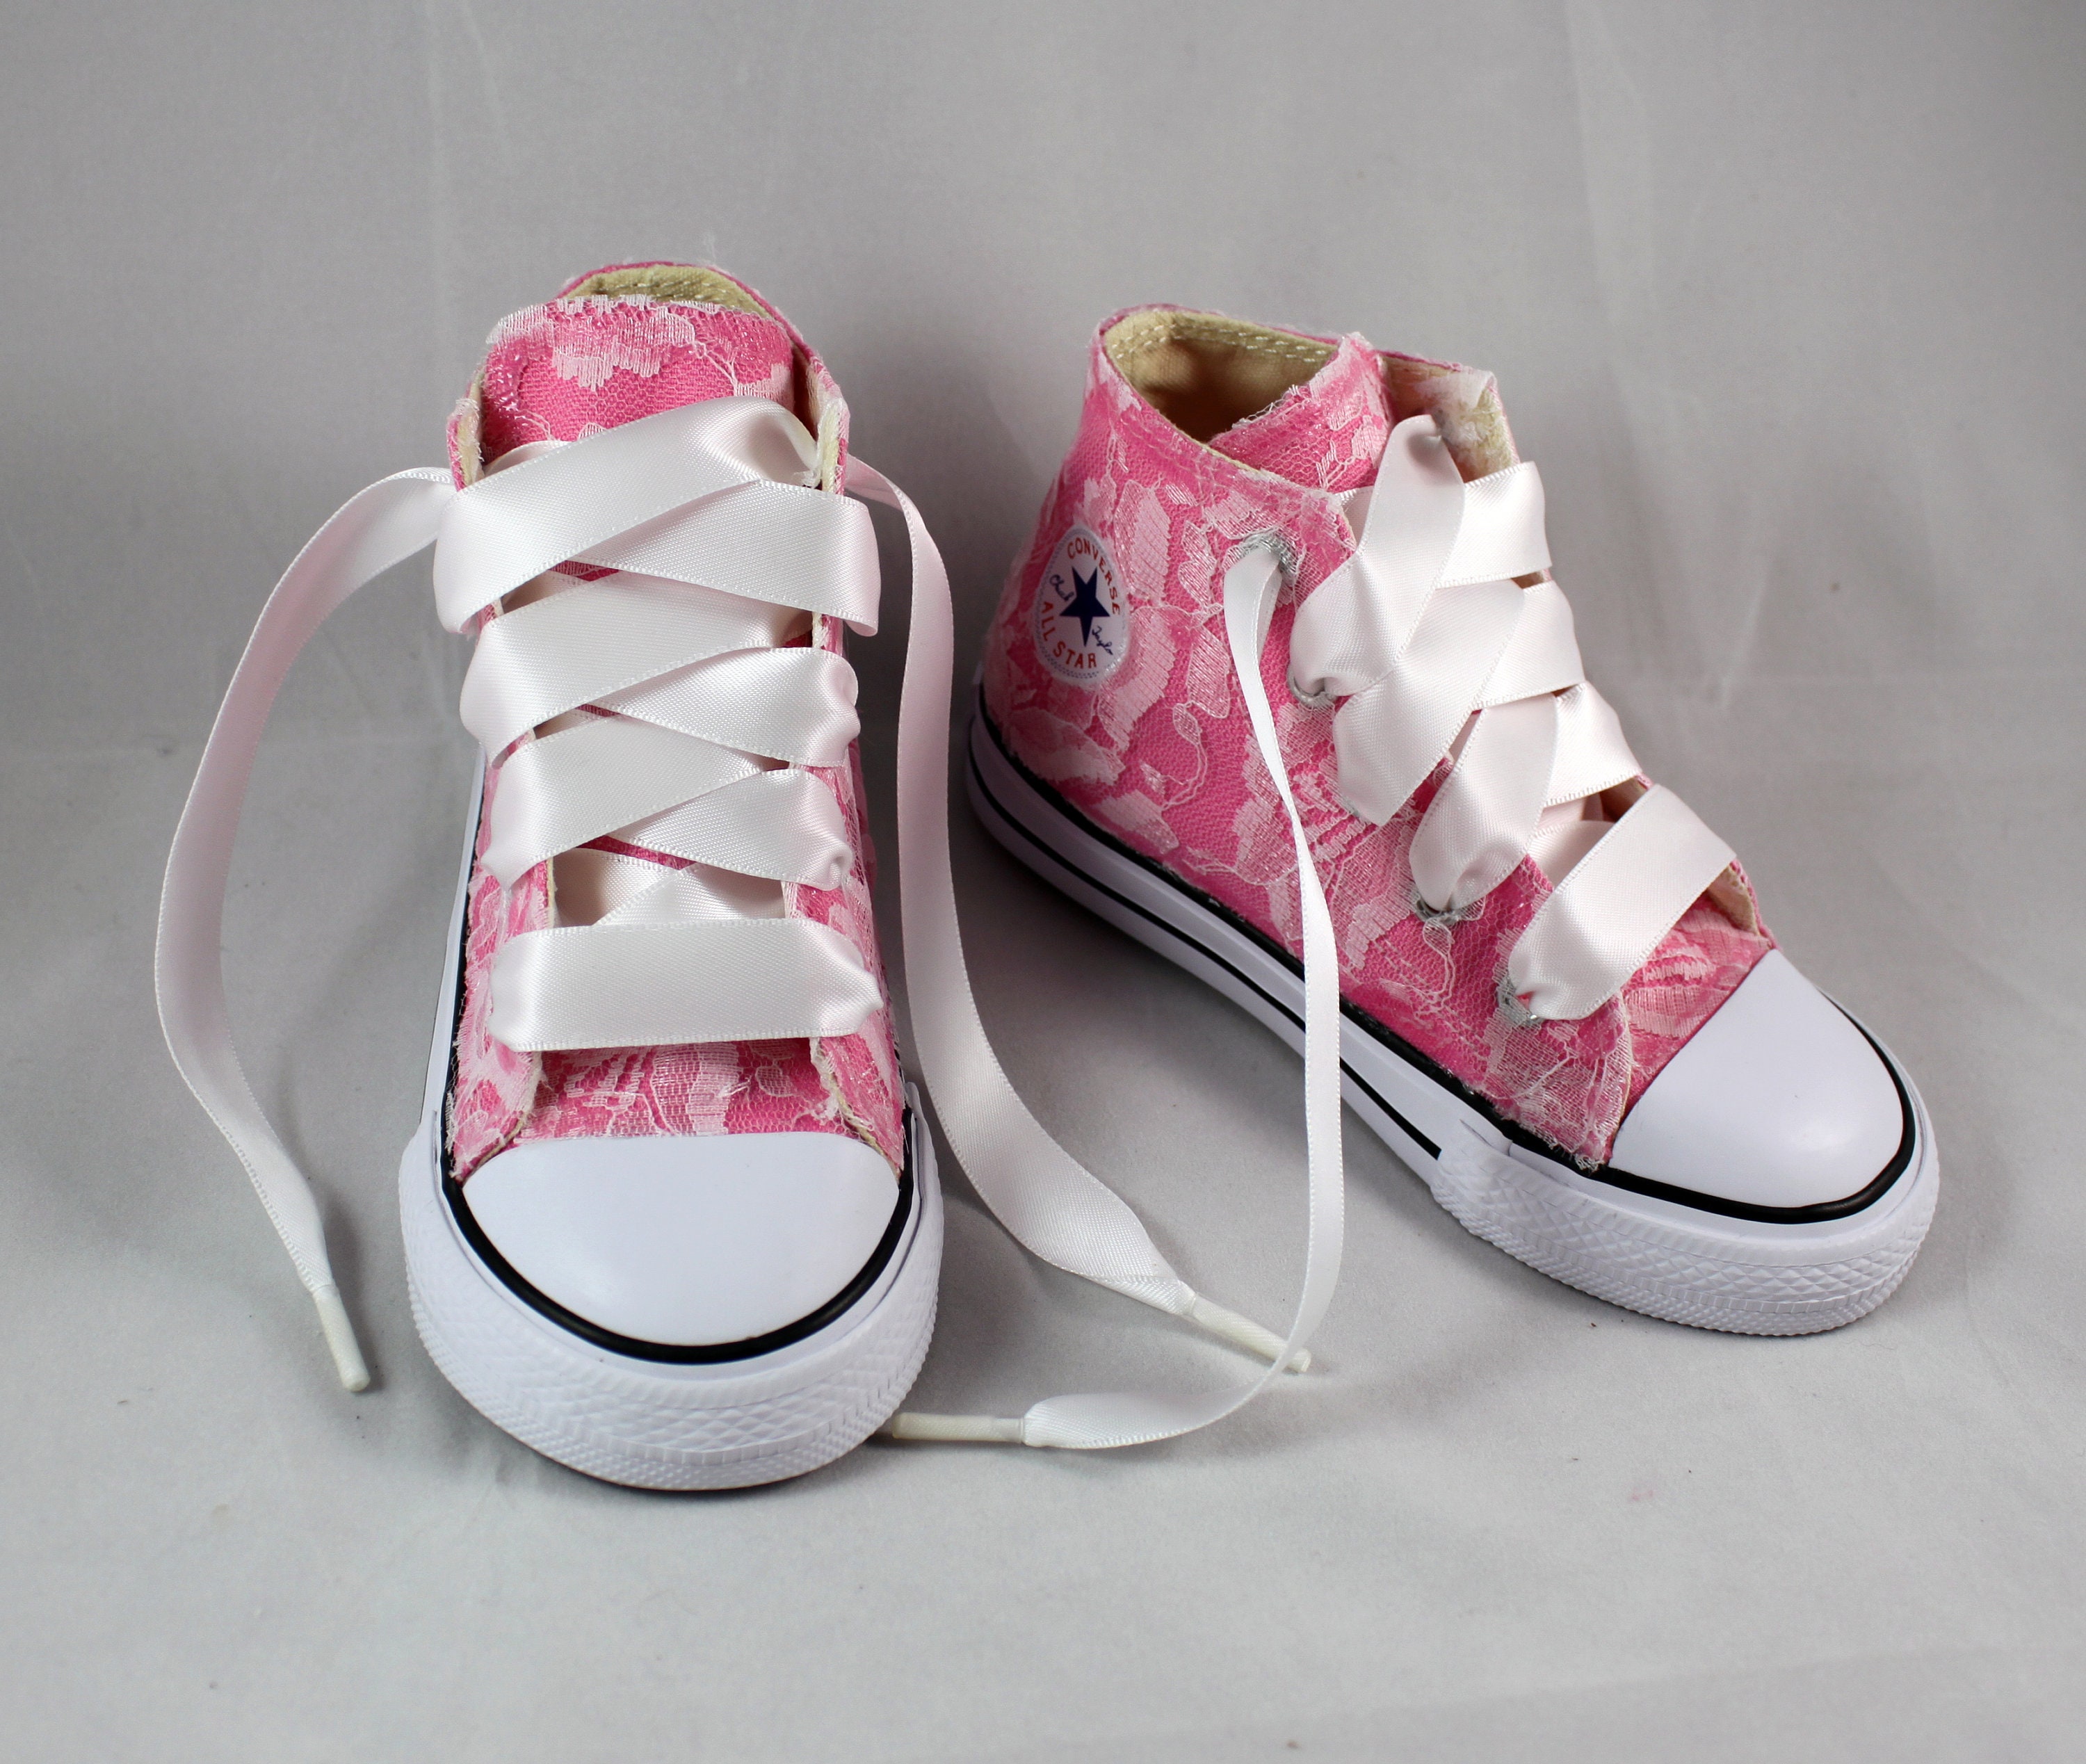 6 Custom Girls Converses For Michalyne Taylor - Lace Converses -- Girls ...